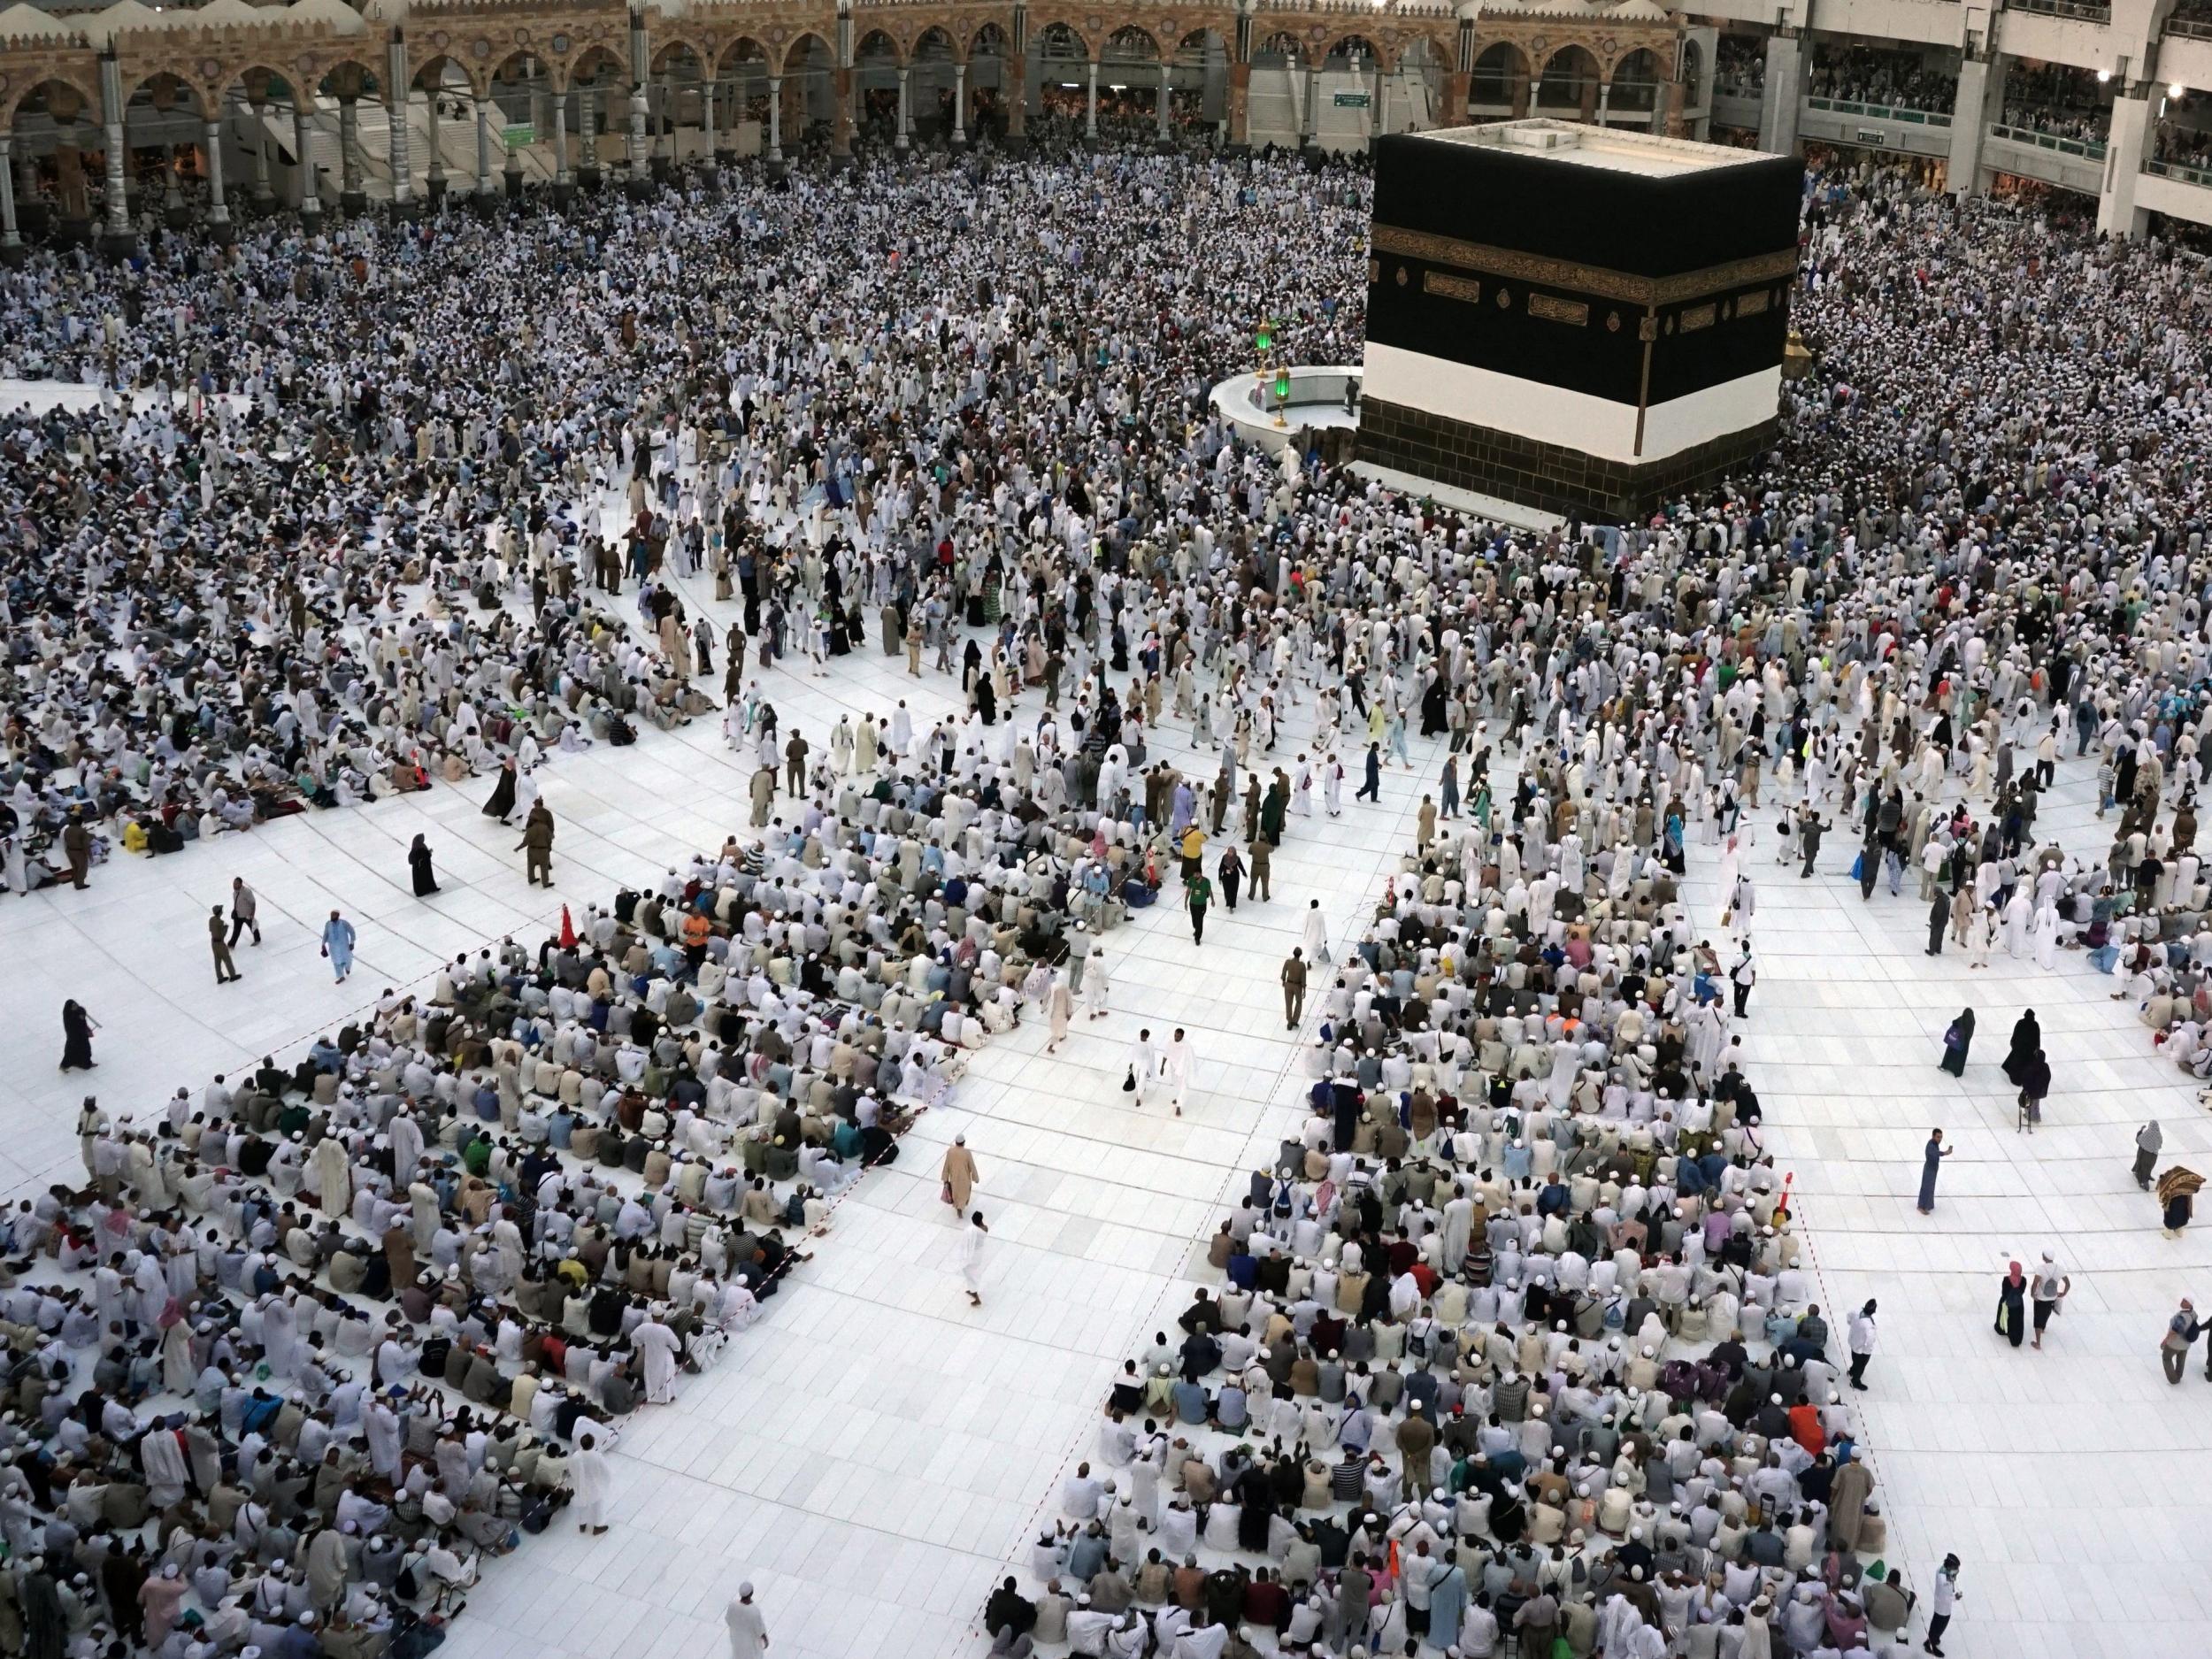 Muslim pilgrims sit around the Kaaba, the cubic building at the Grand Mosque, ahead of the annual Hajj